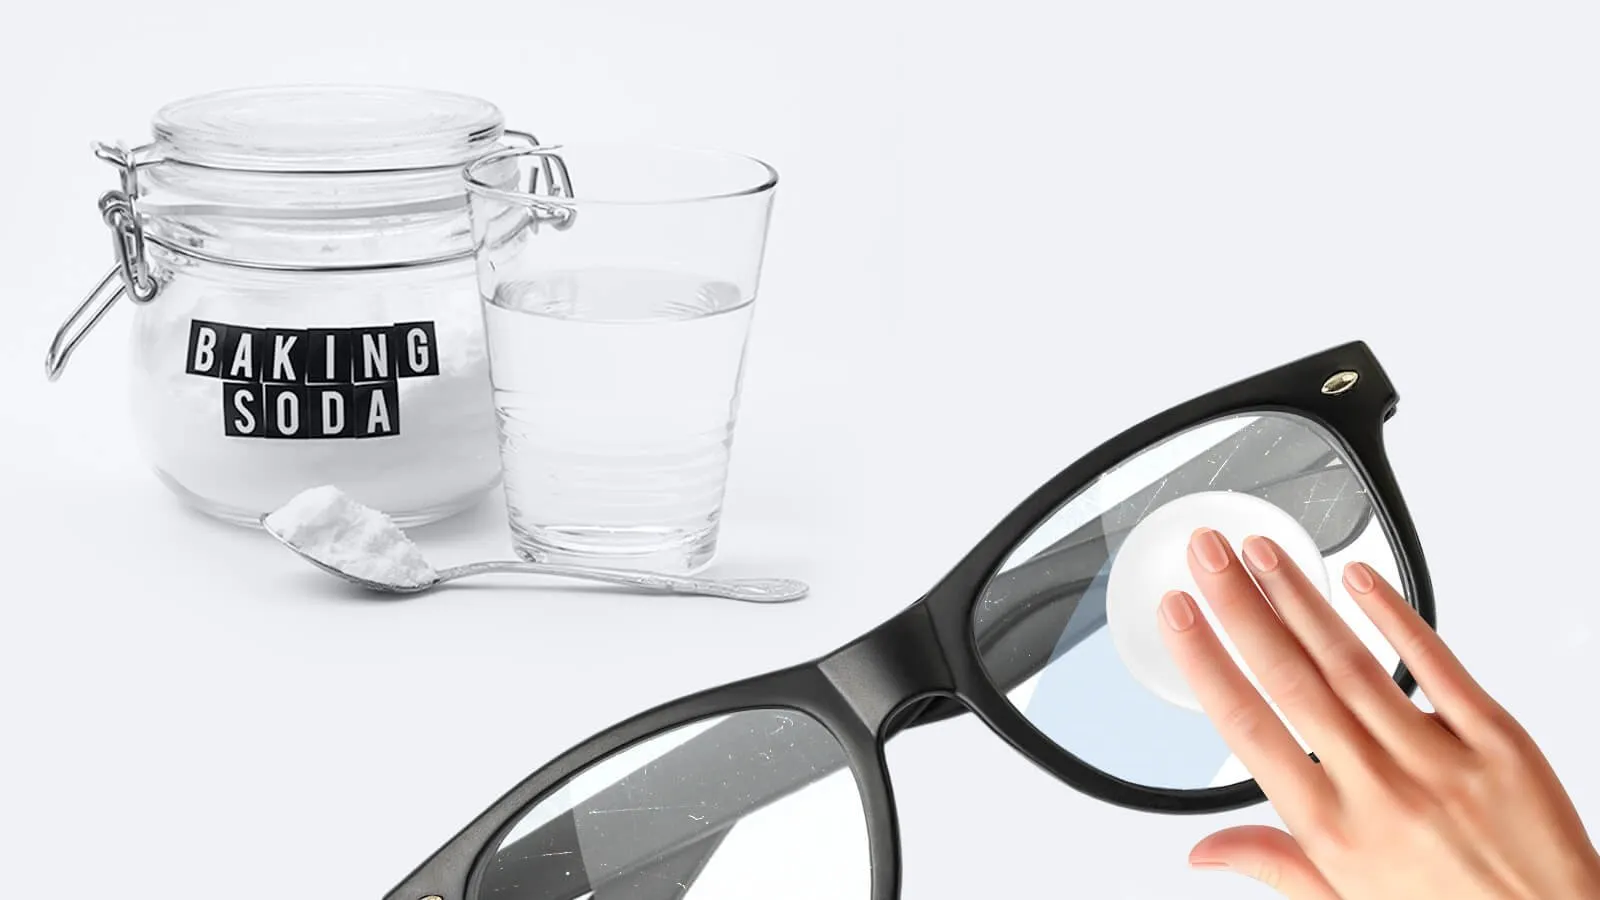 How to Remove Scratches from Glasses [A Complete DIY Guide]